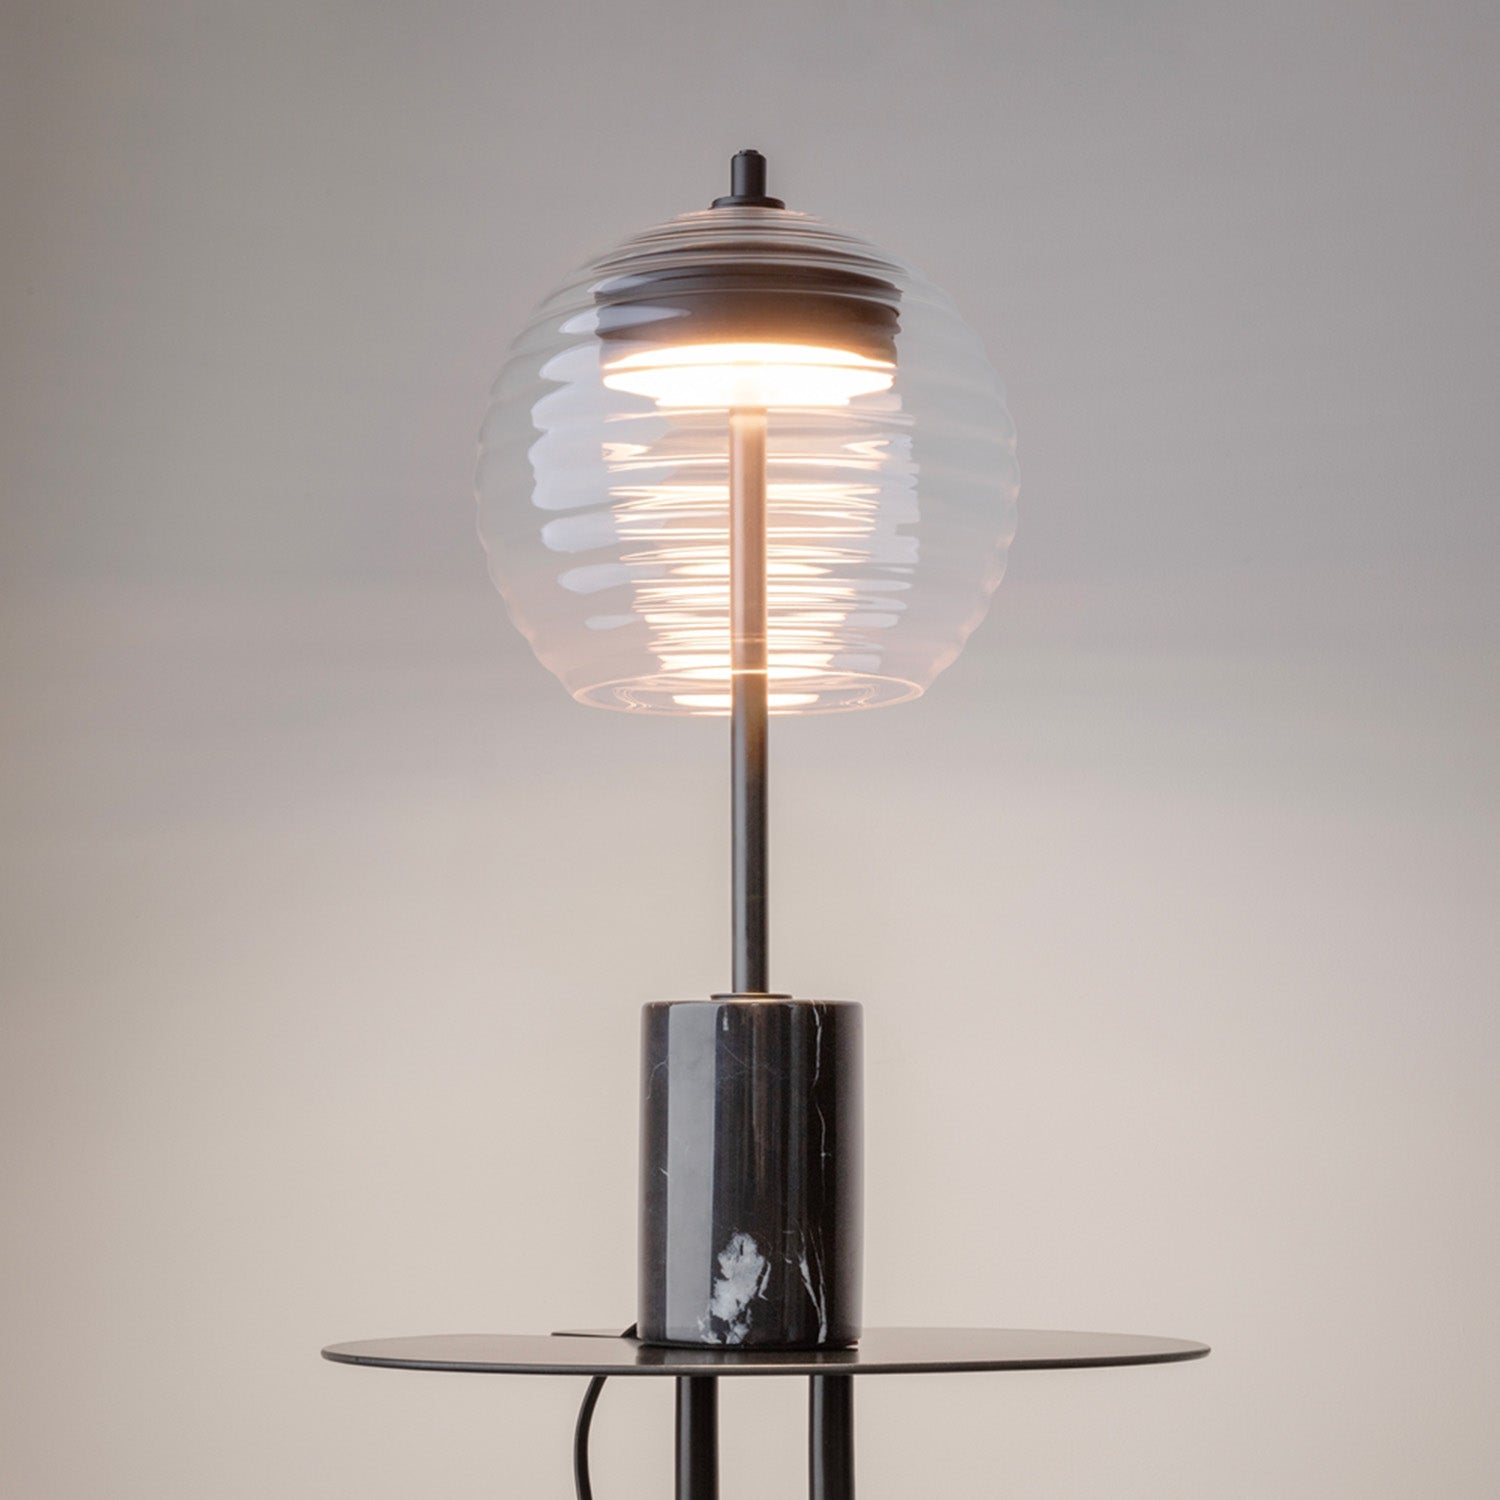 MYSTIC - Black marble and glass table lamp